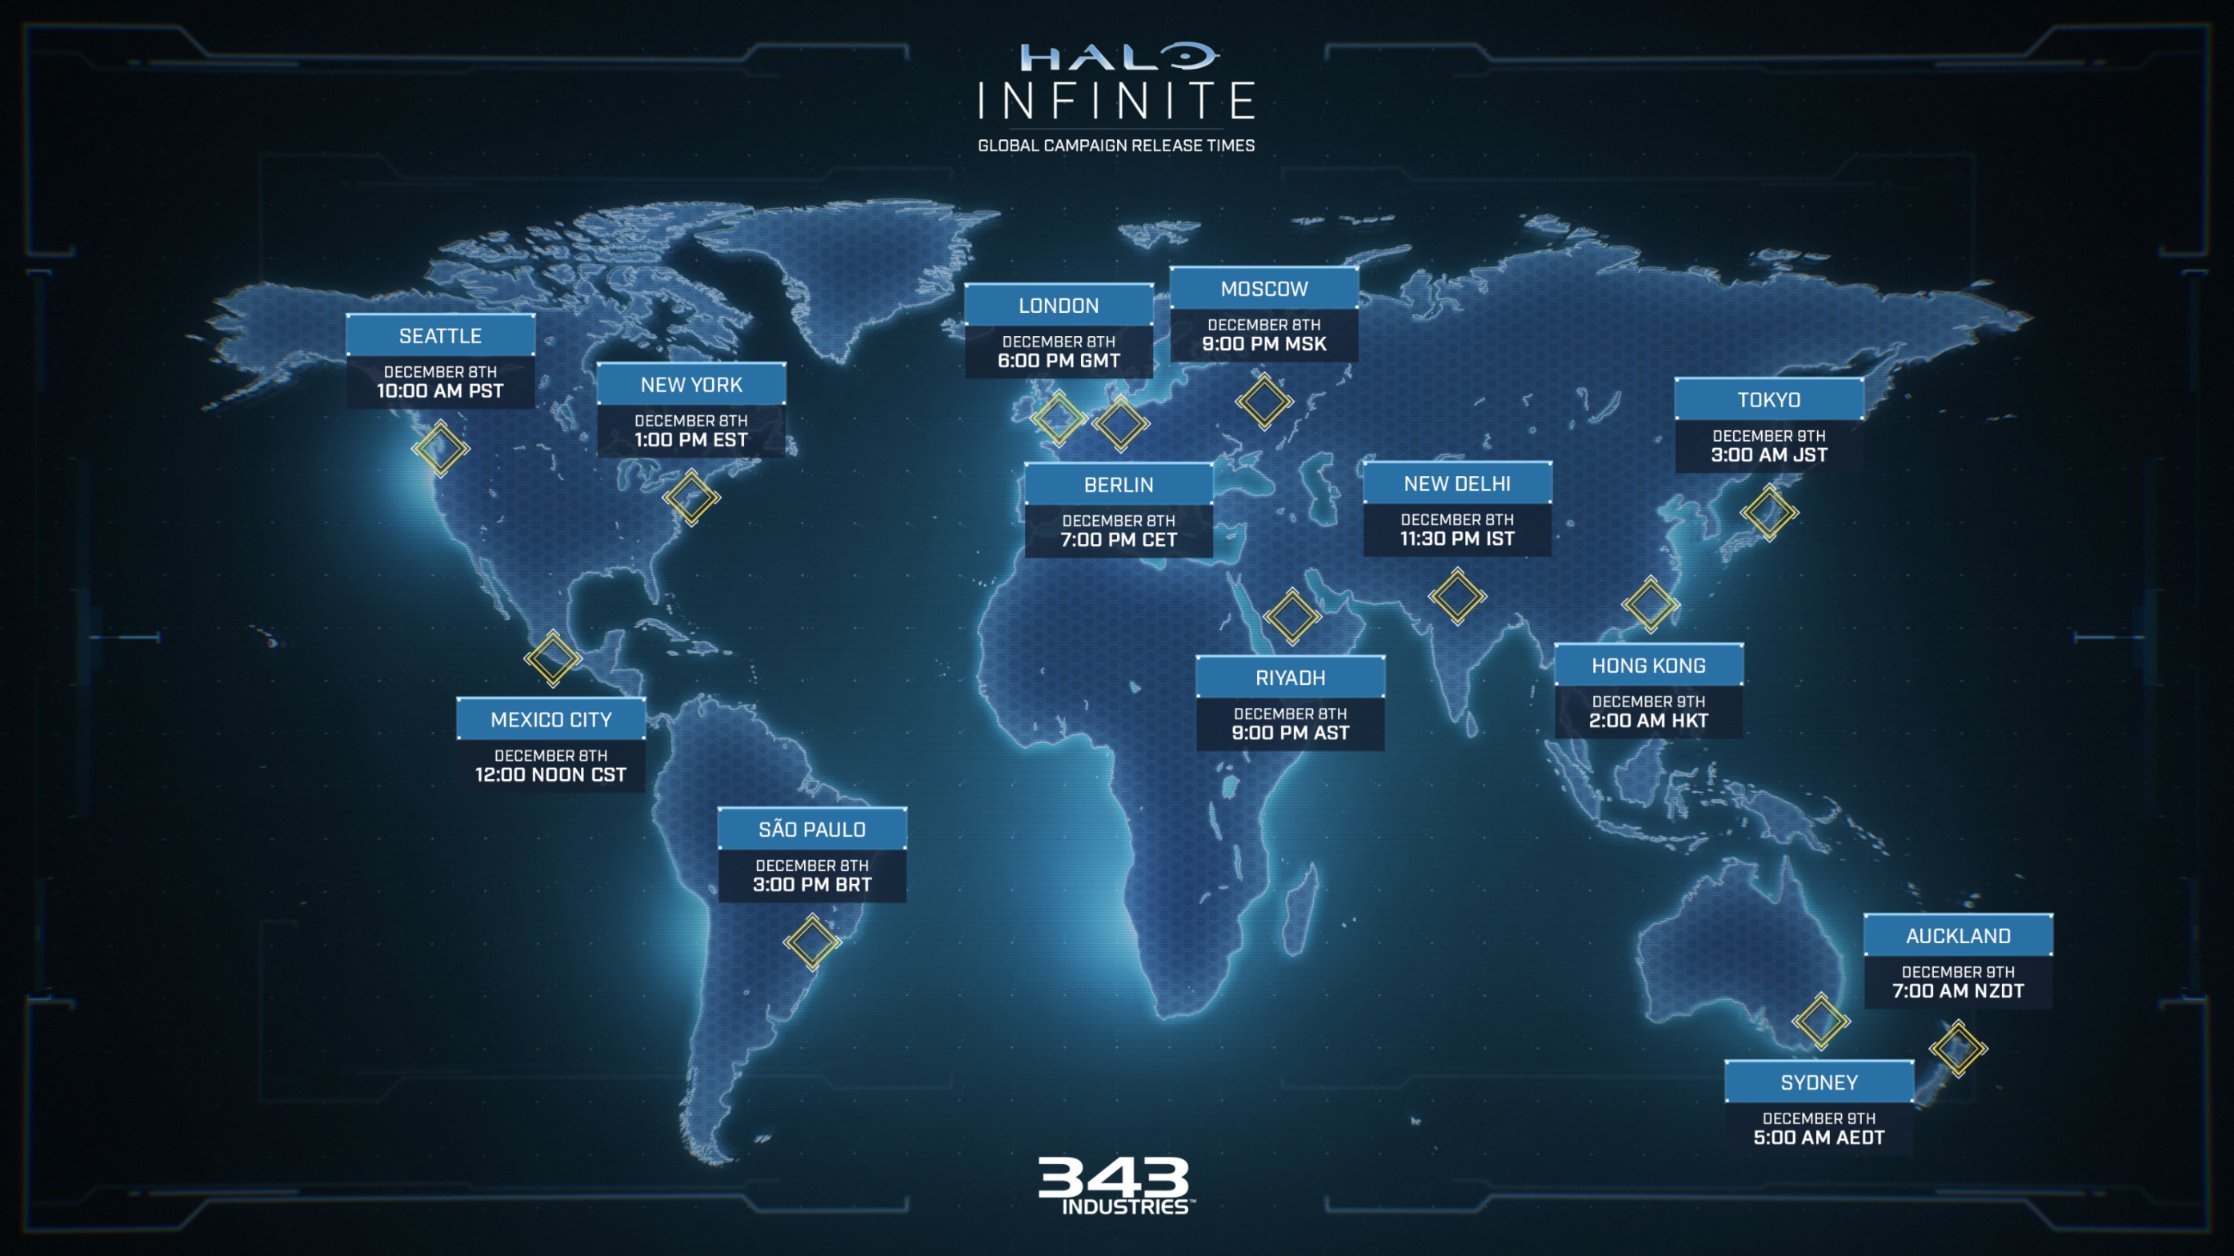 Halo on Twitter: "Today is the day. If you're curious about when #HaloInfinite launches in your region, we've got you covered. 🌎 https://t.co/WLjwR79Q25" / Twitter